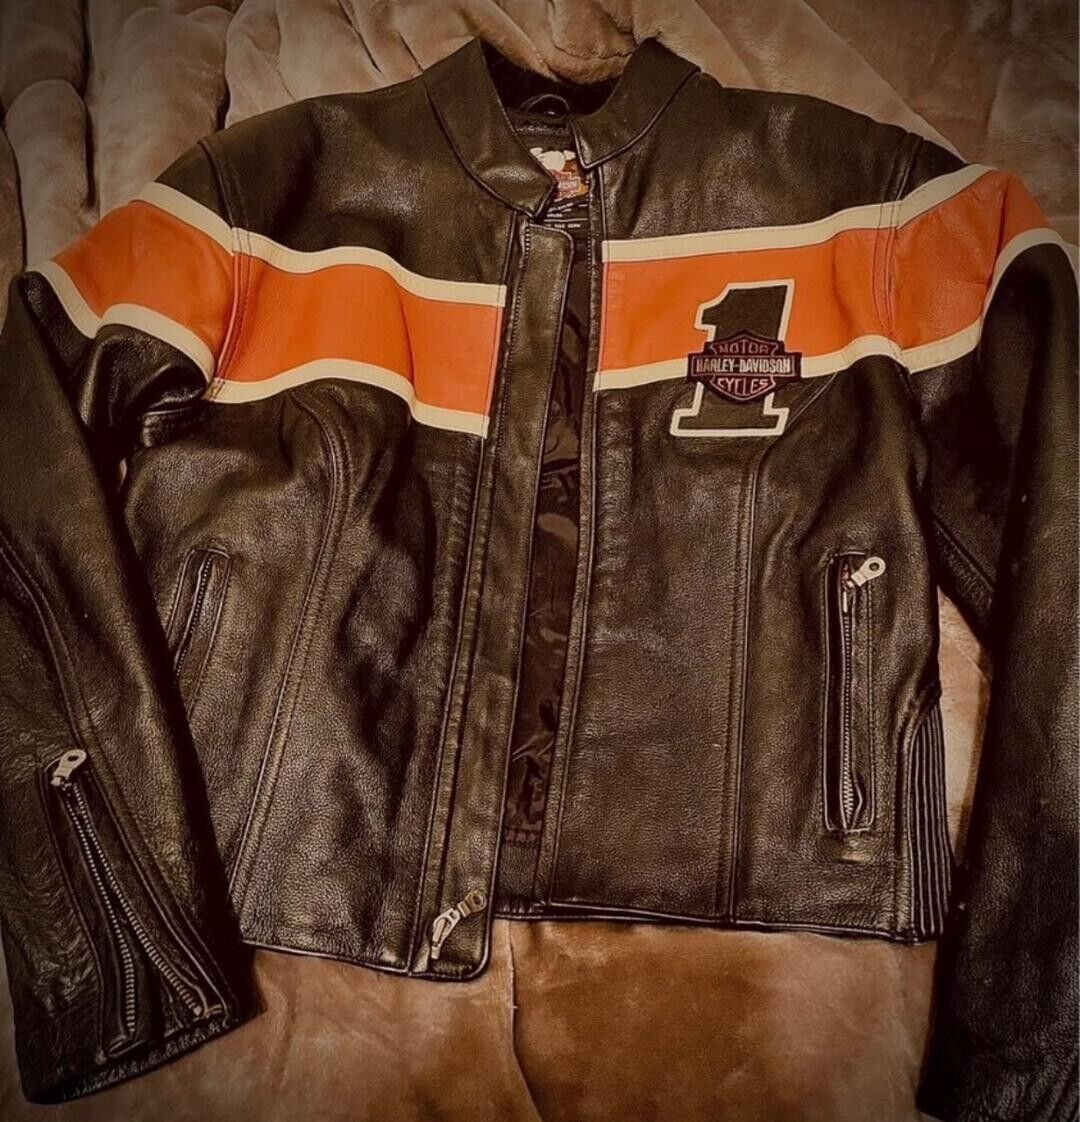 Limited Issue # 1 Harley Davidson - Leather Riding Jacket - Women’s size small